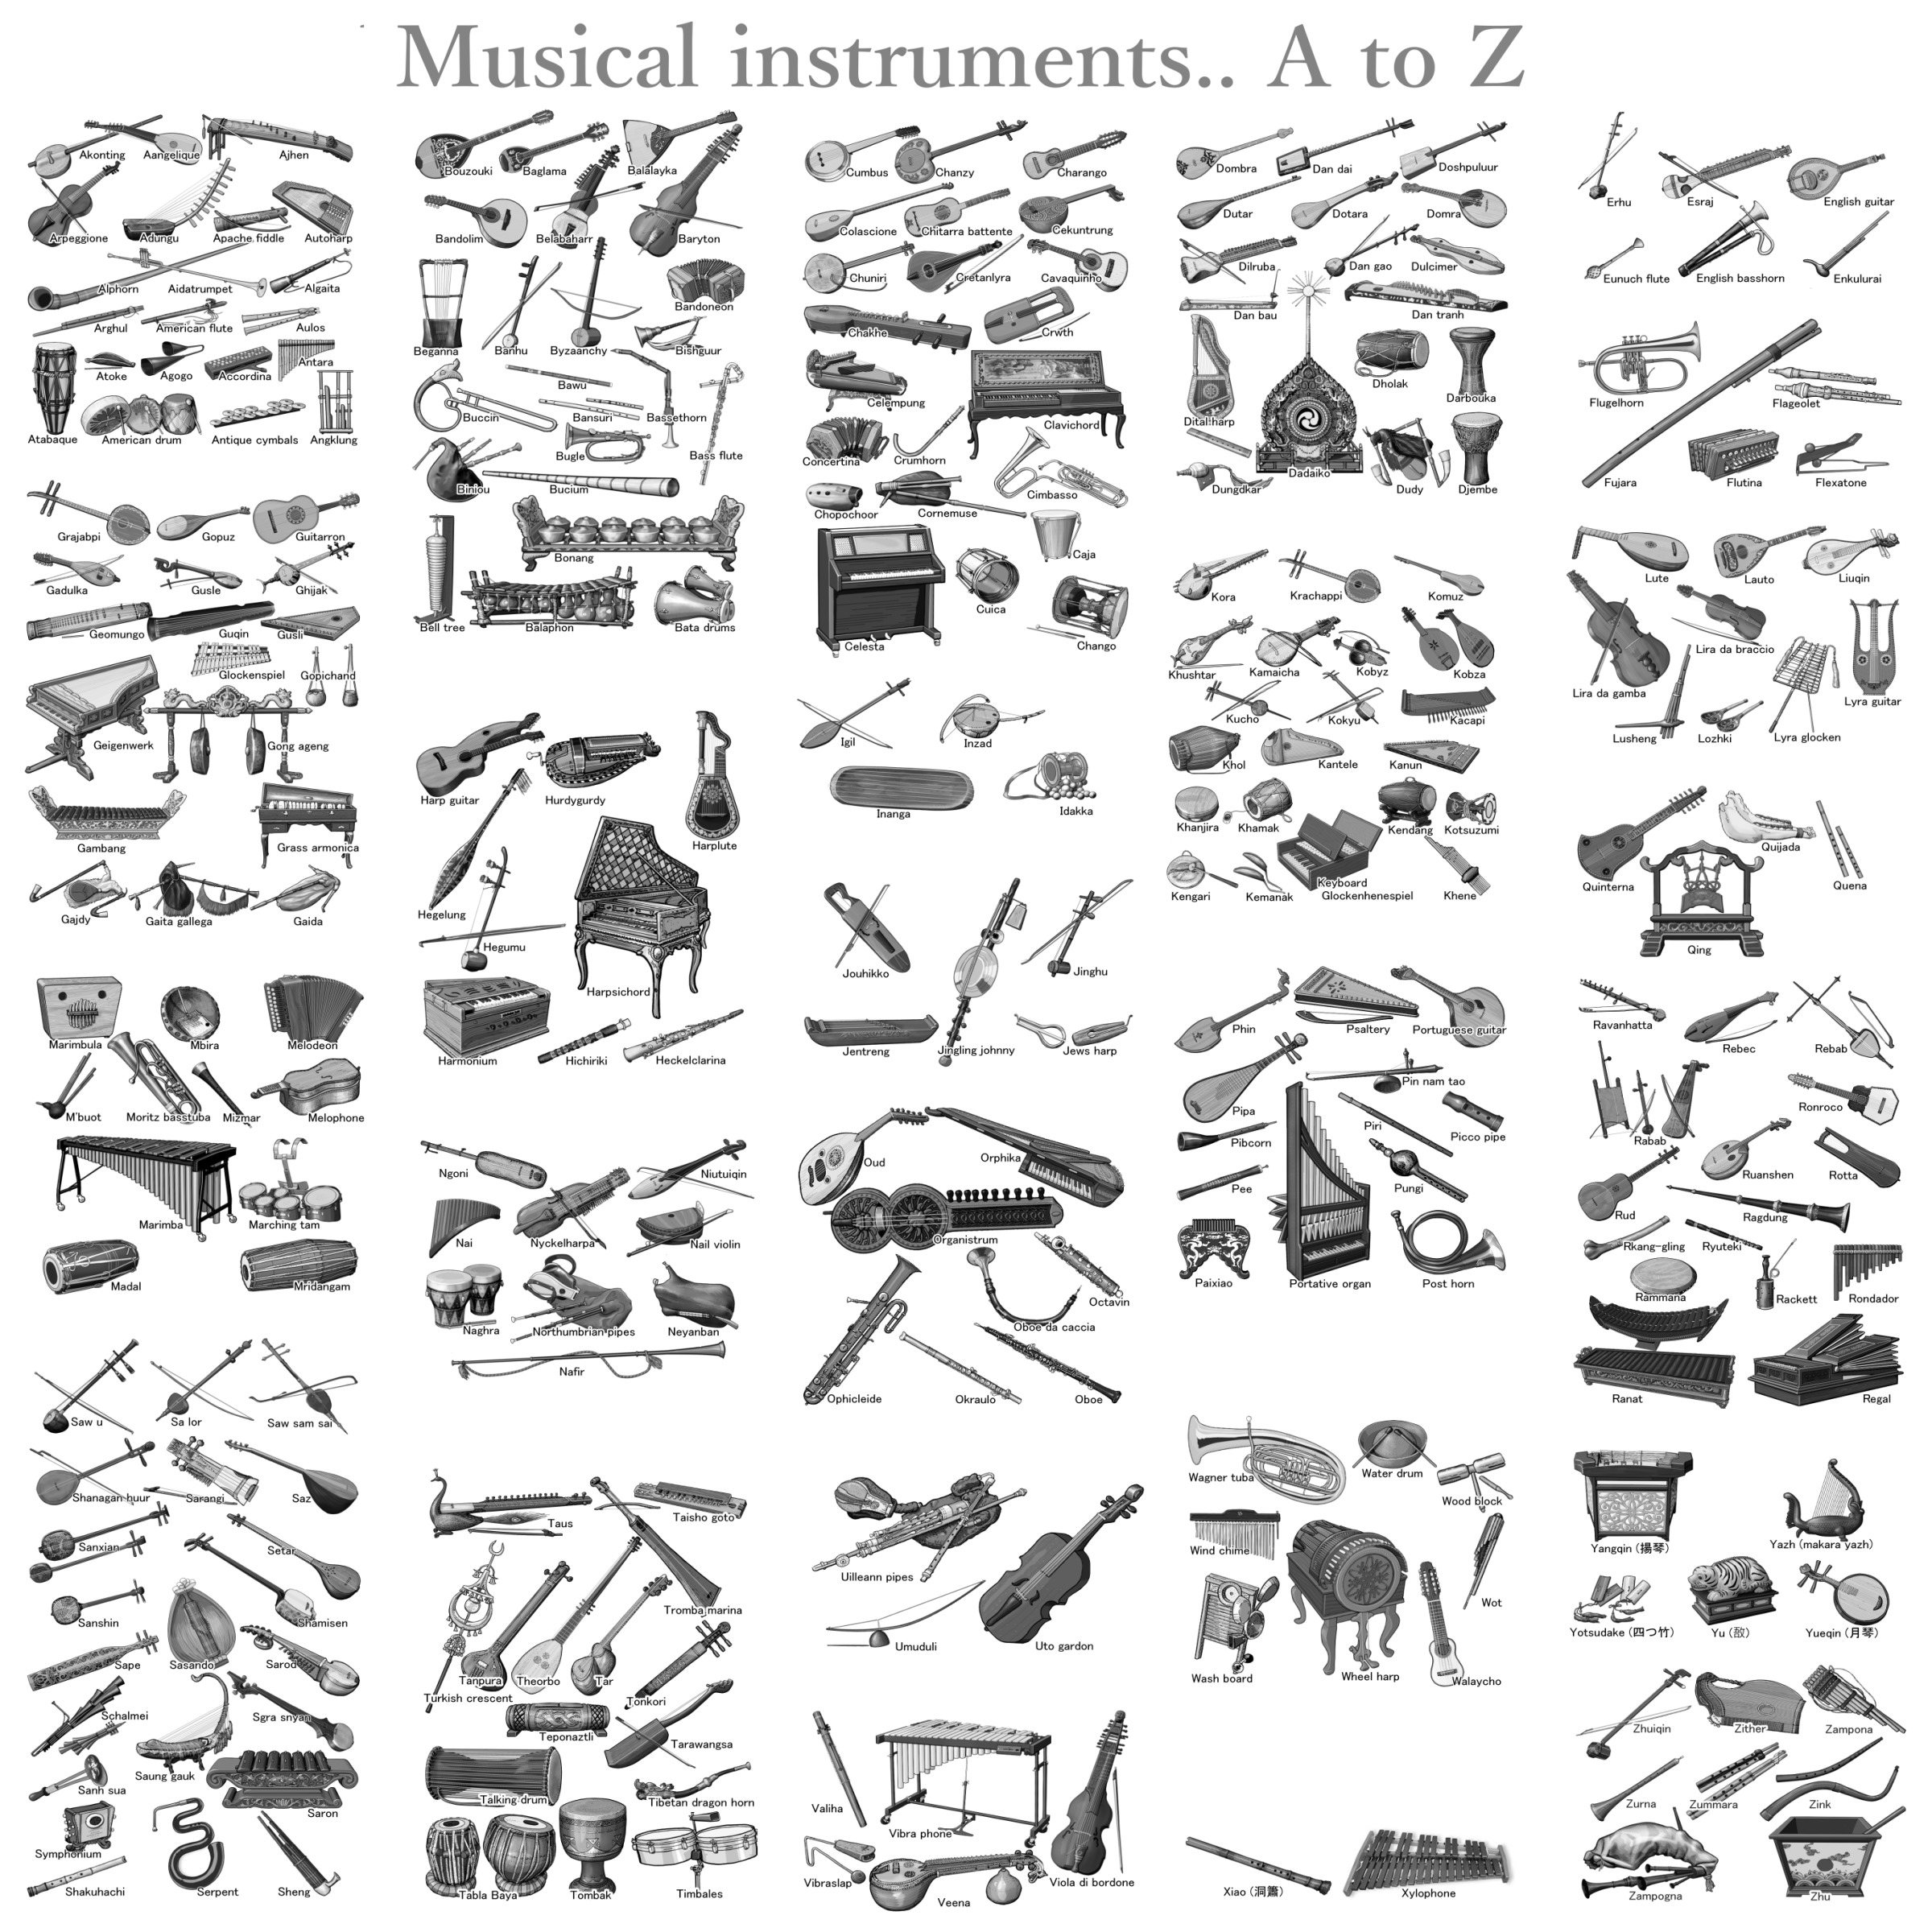 musical insturuments A to Z